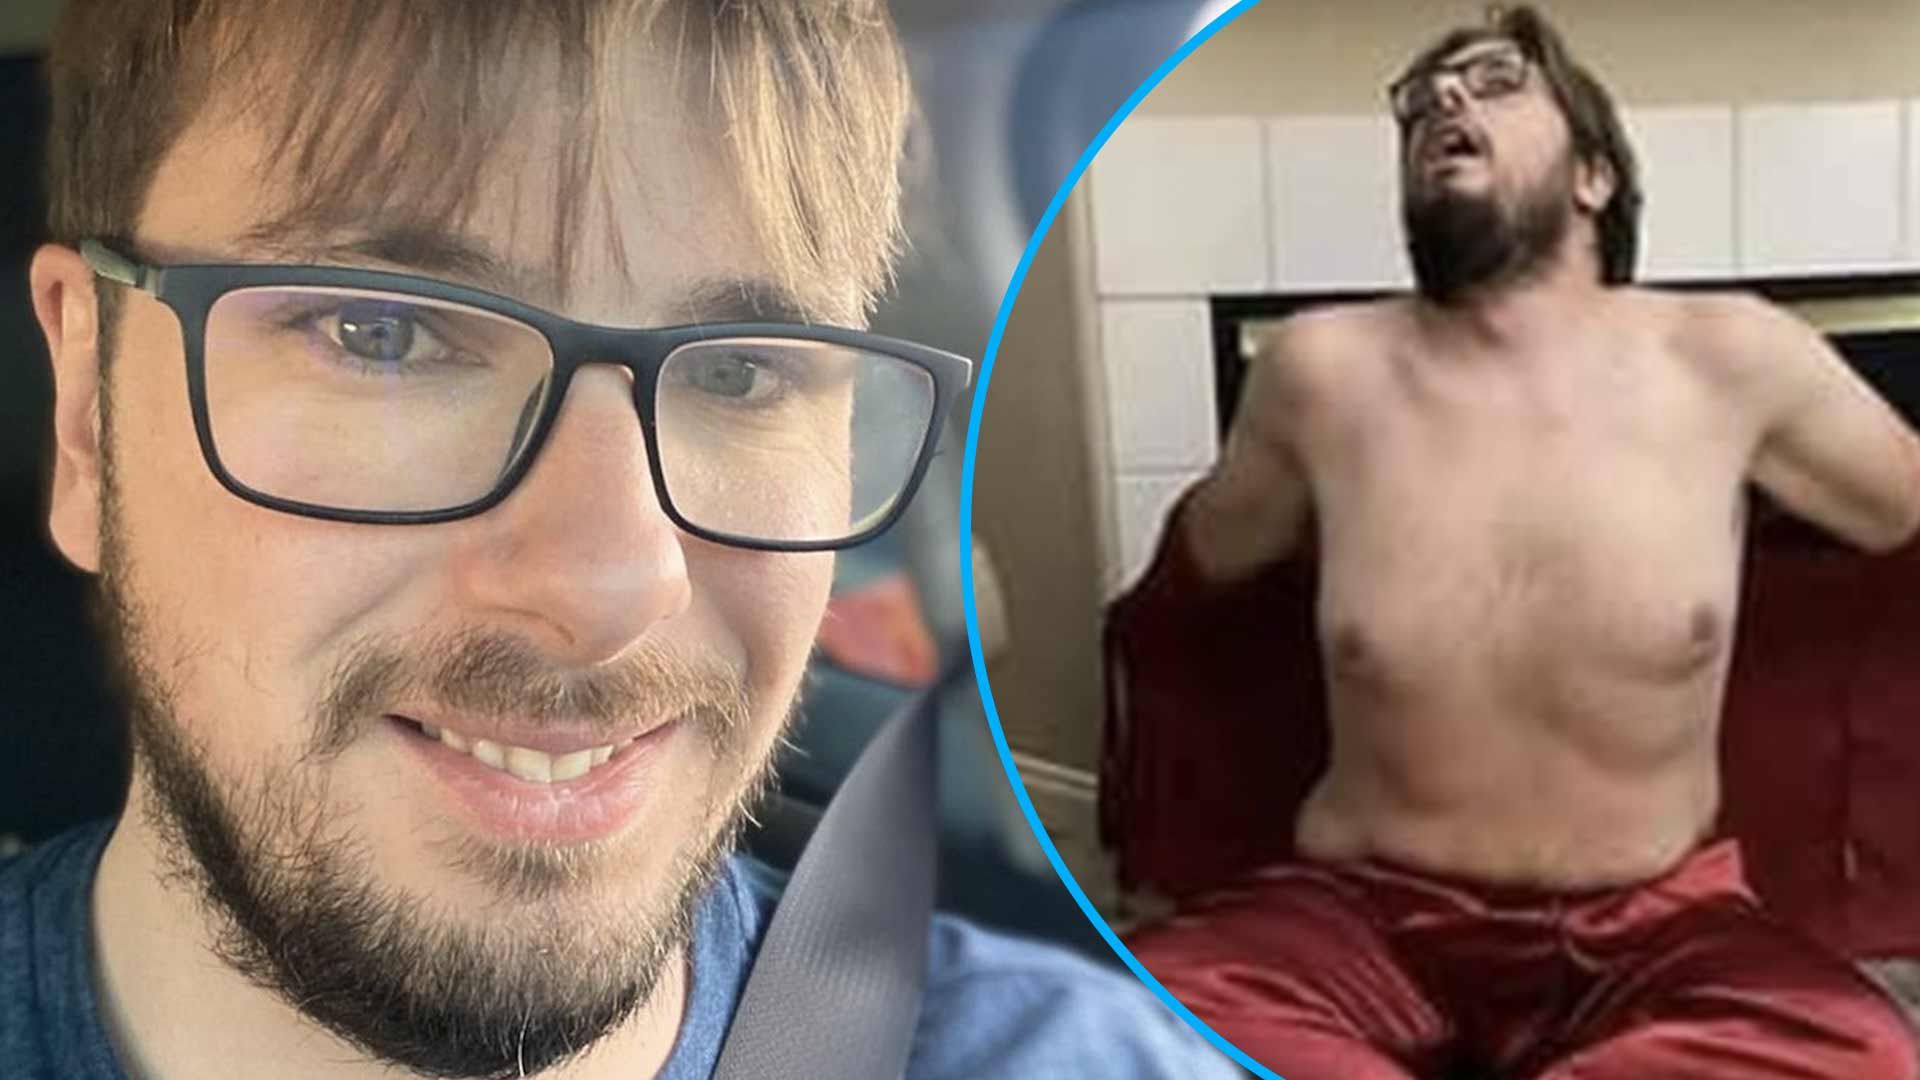 Colt From '90 Day Fiancé' Has an OnlyFans and There Are Photos.